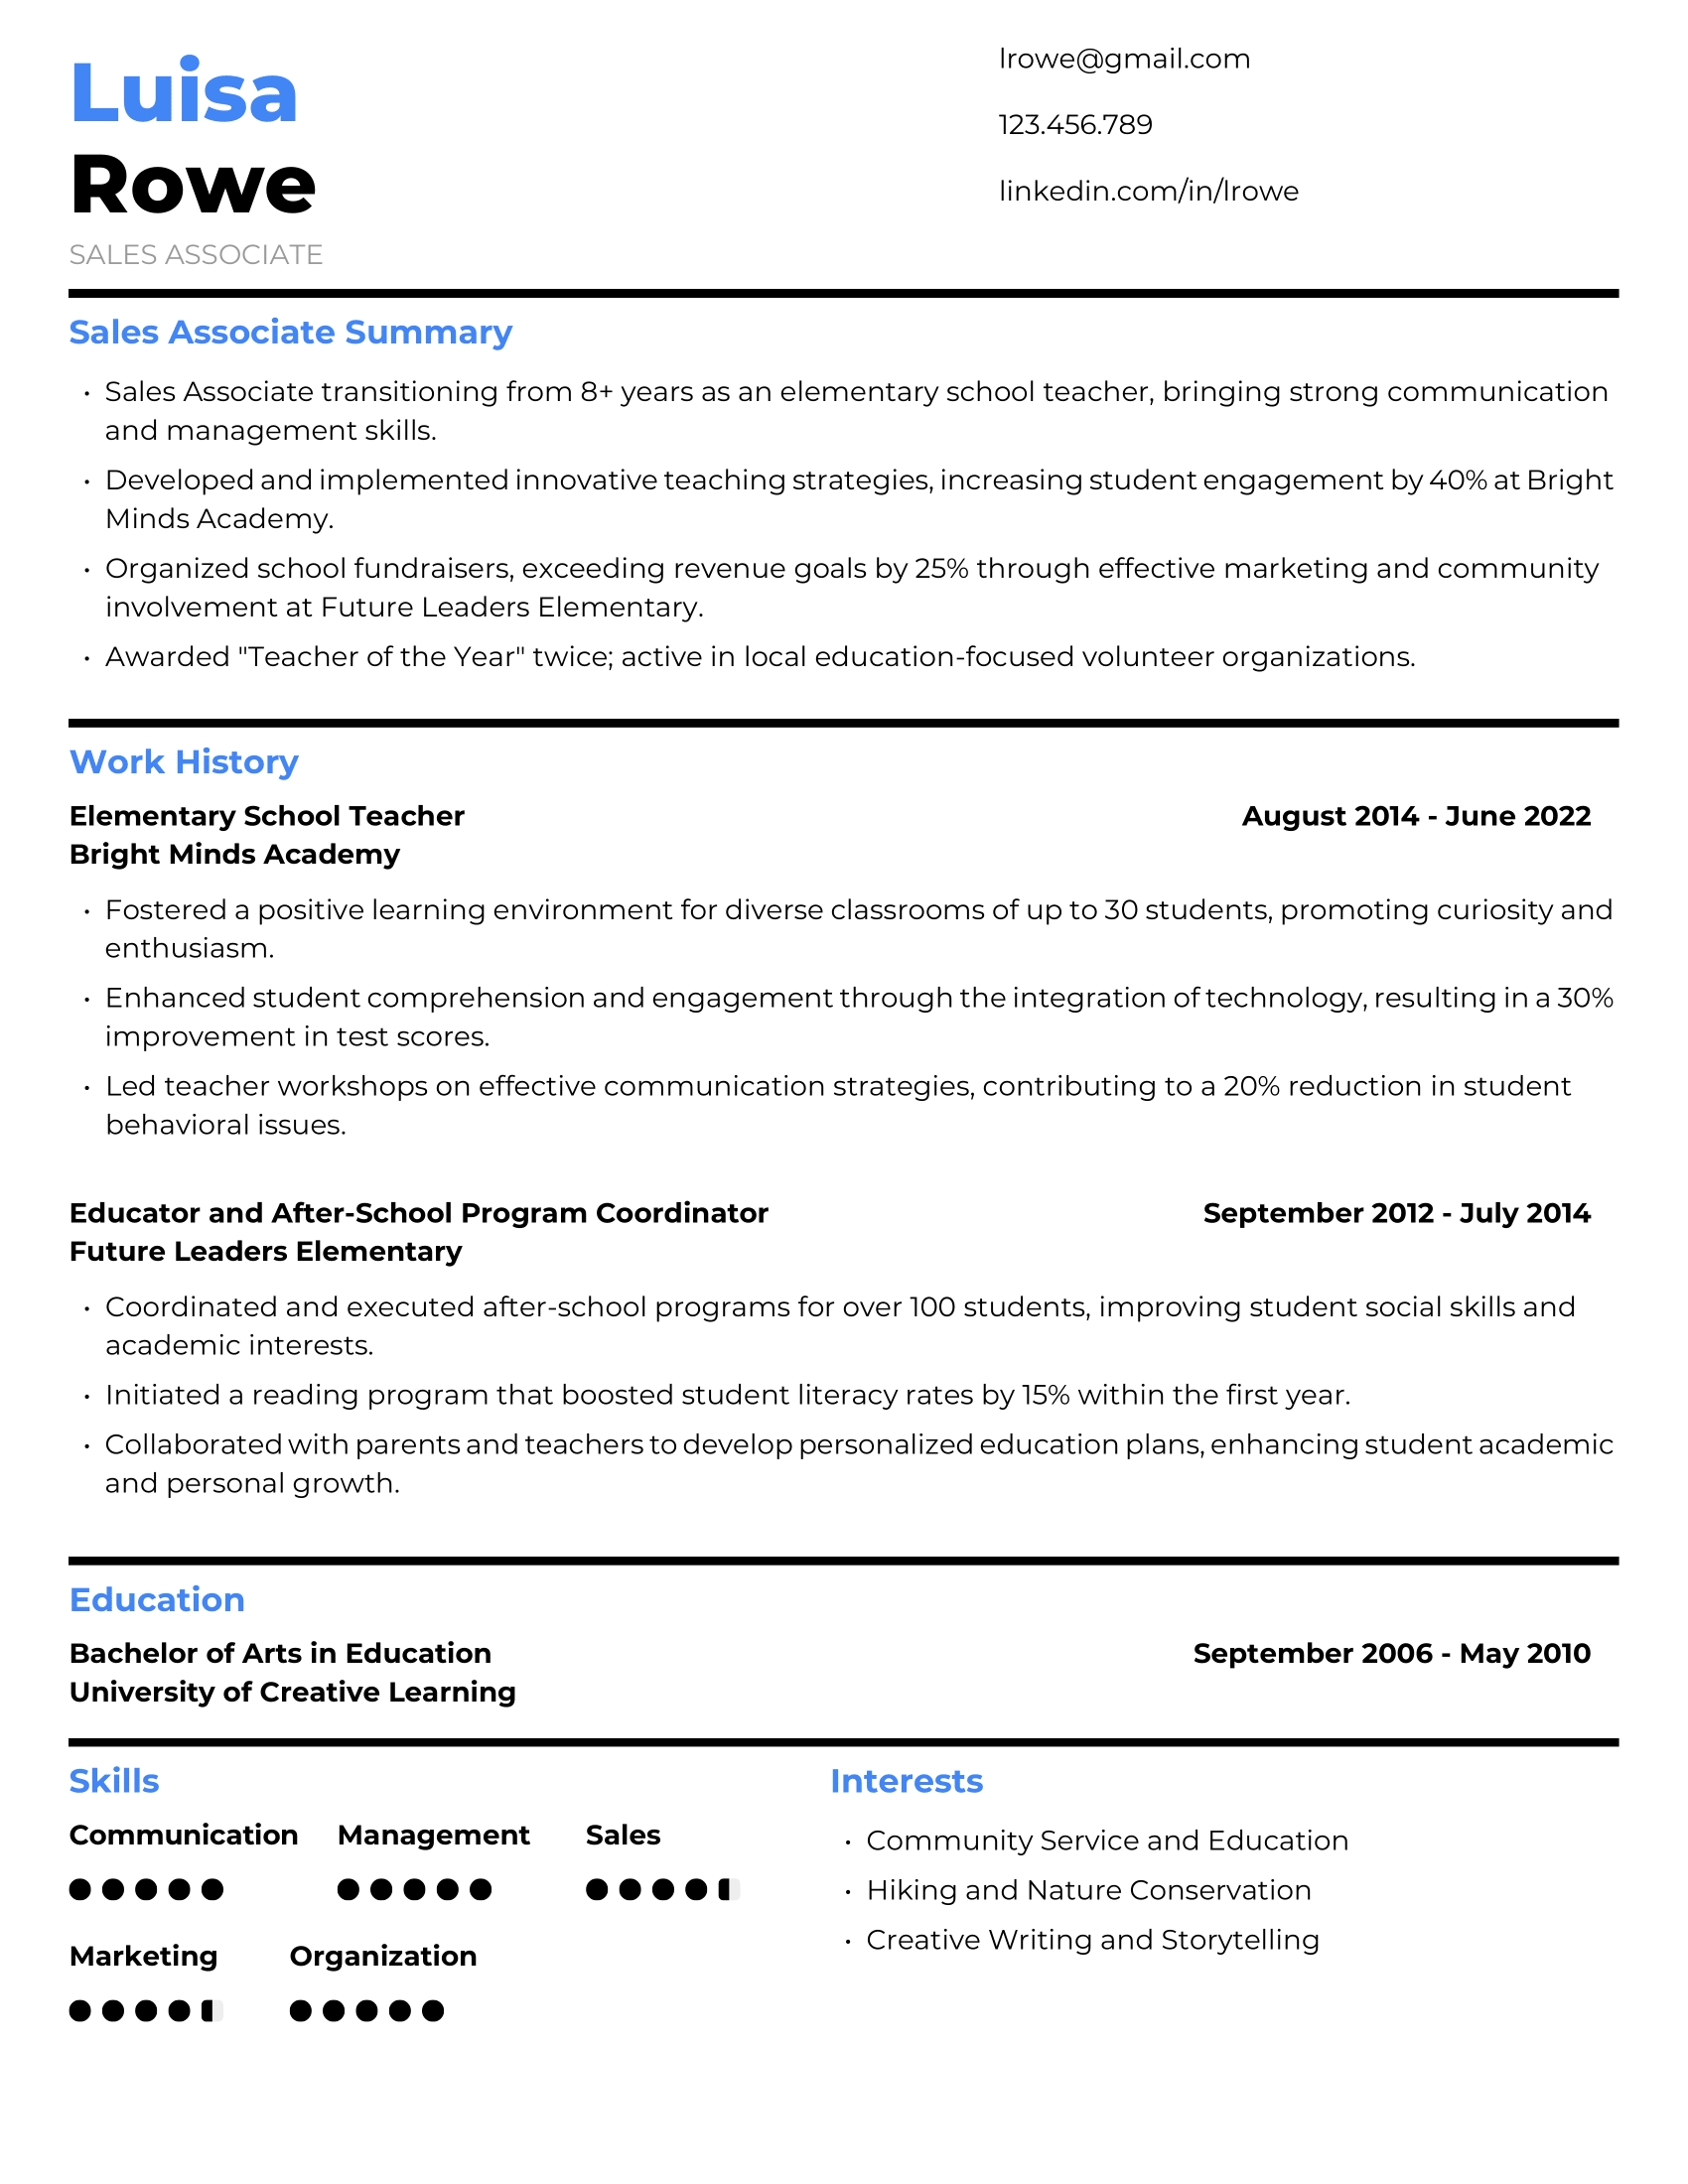 Sales Associate Resume Example #2 - Non-Traditional